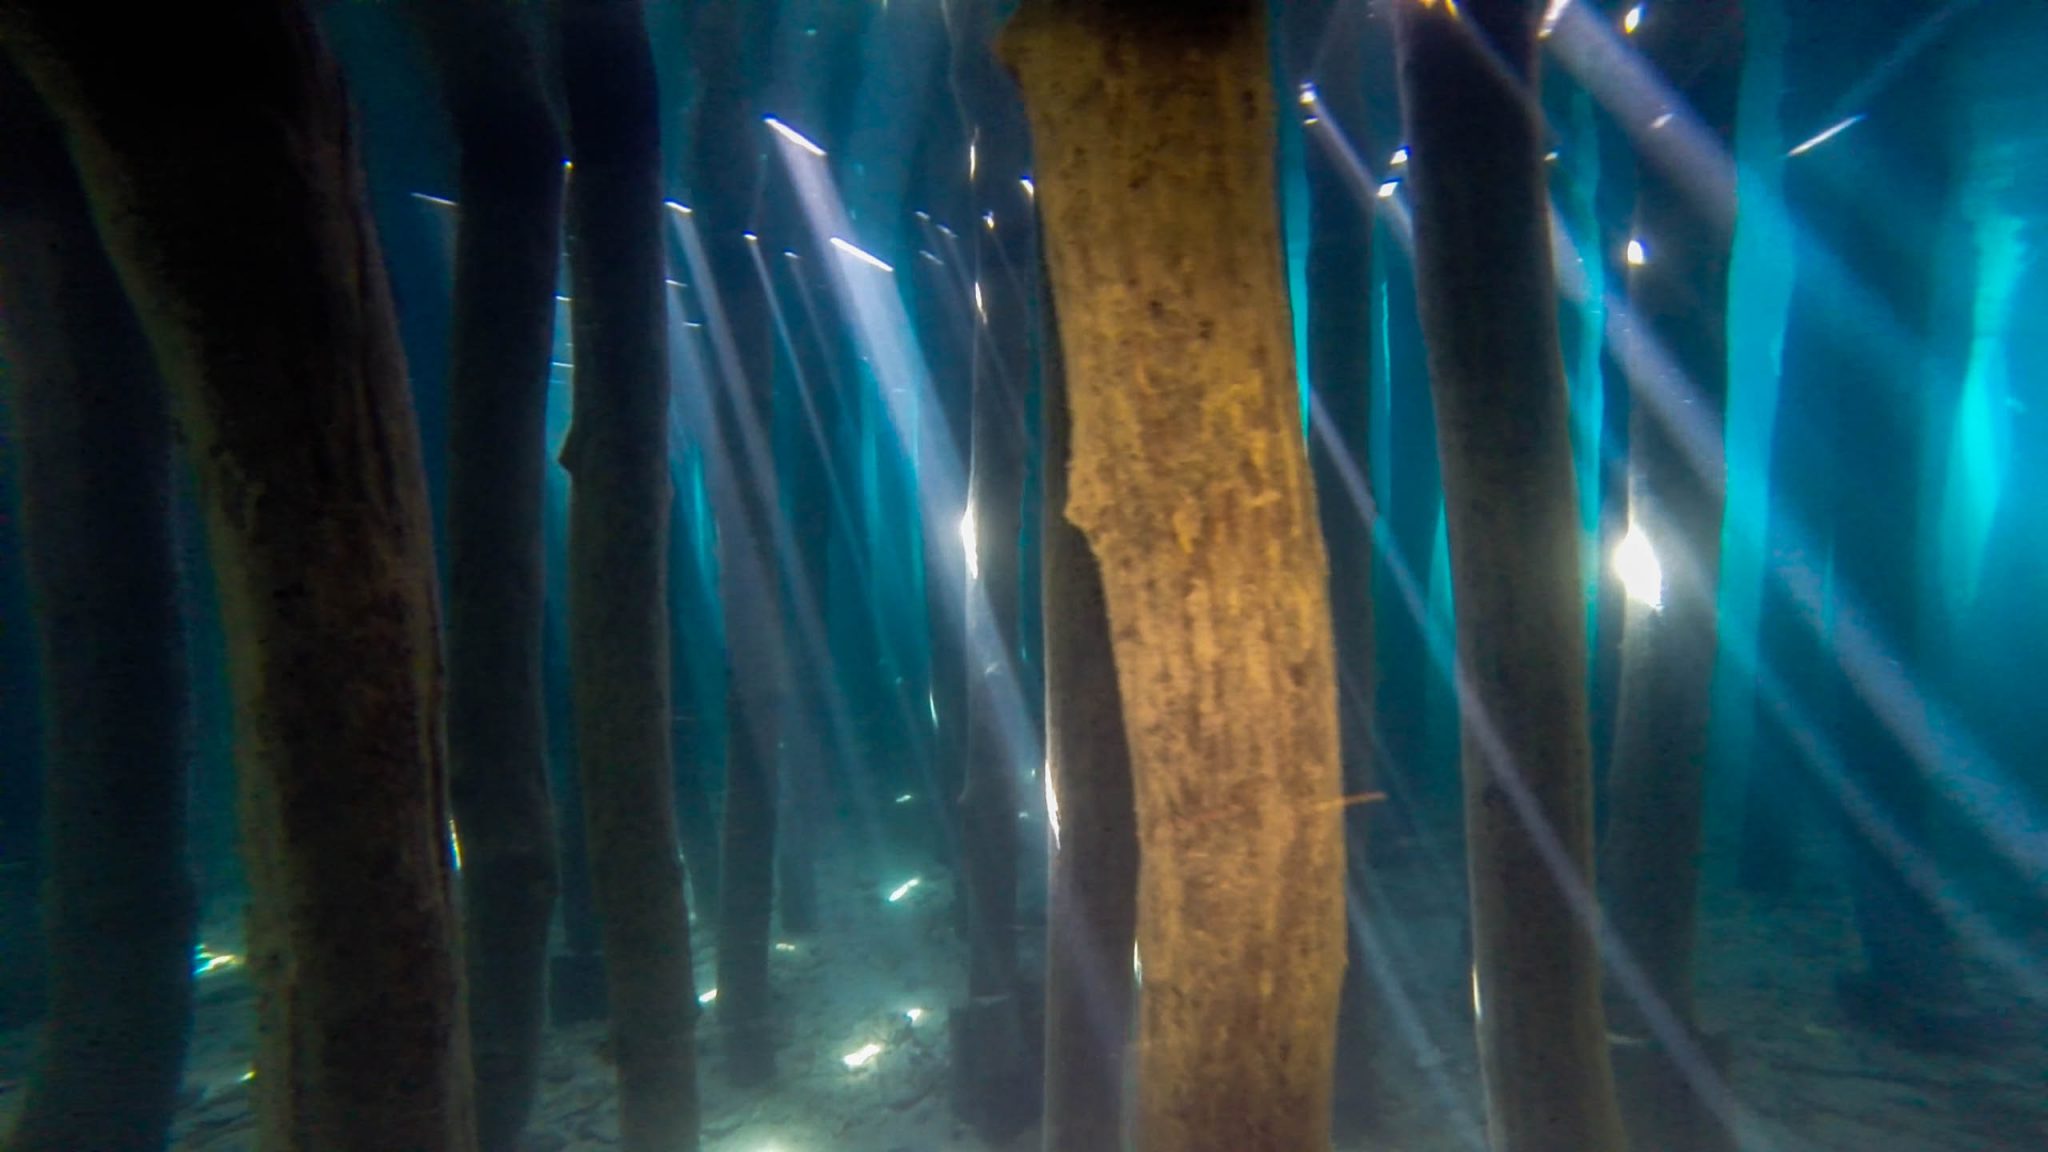 The Light Piercing Through Underwater at The Columns Of The Bay Of Bones in Macedonia